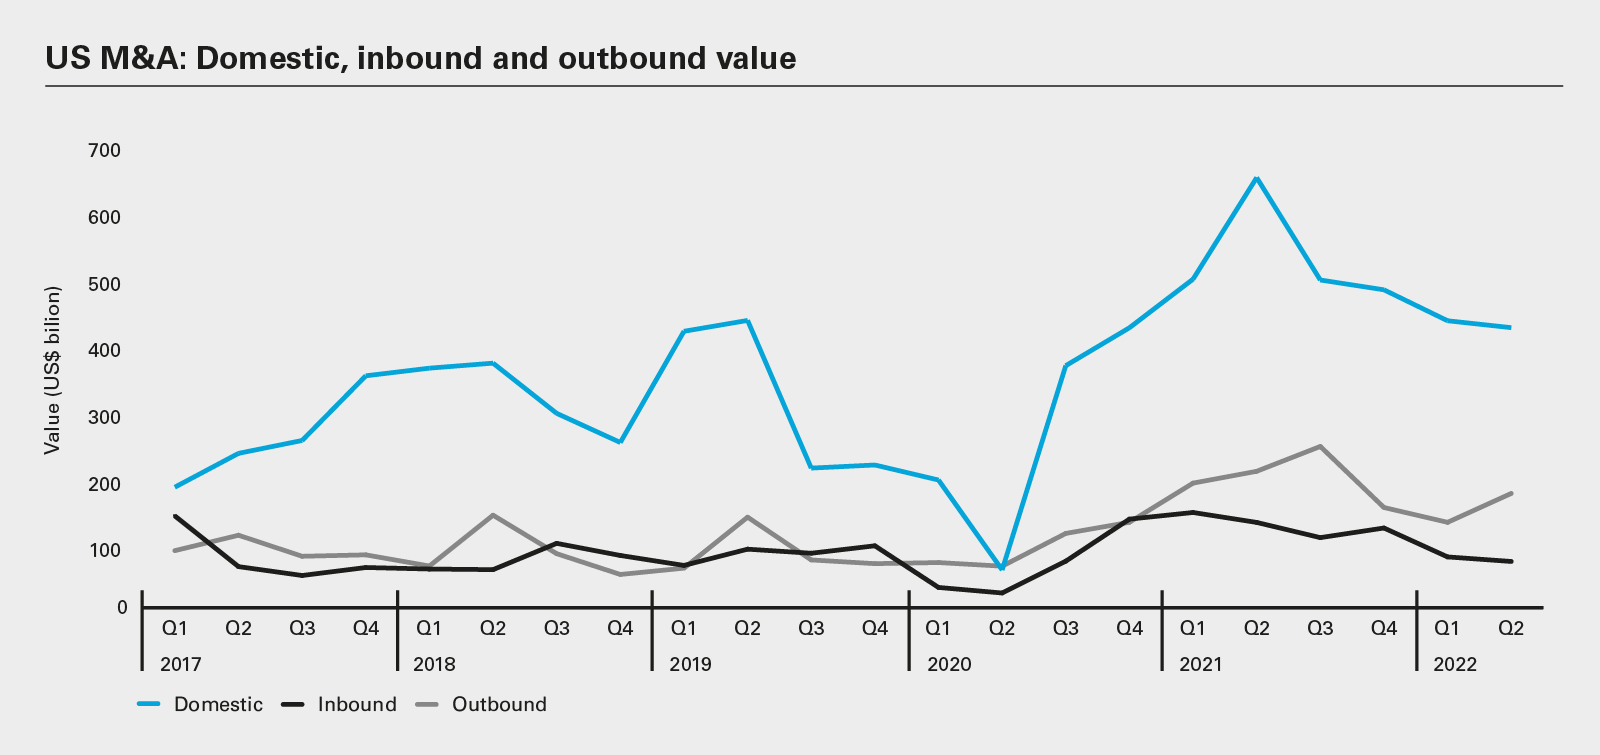 US M&A: Domestic, inbound and outbound value 